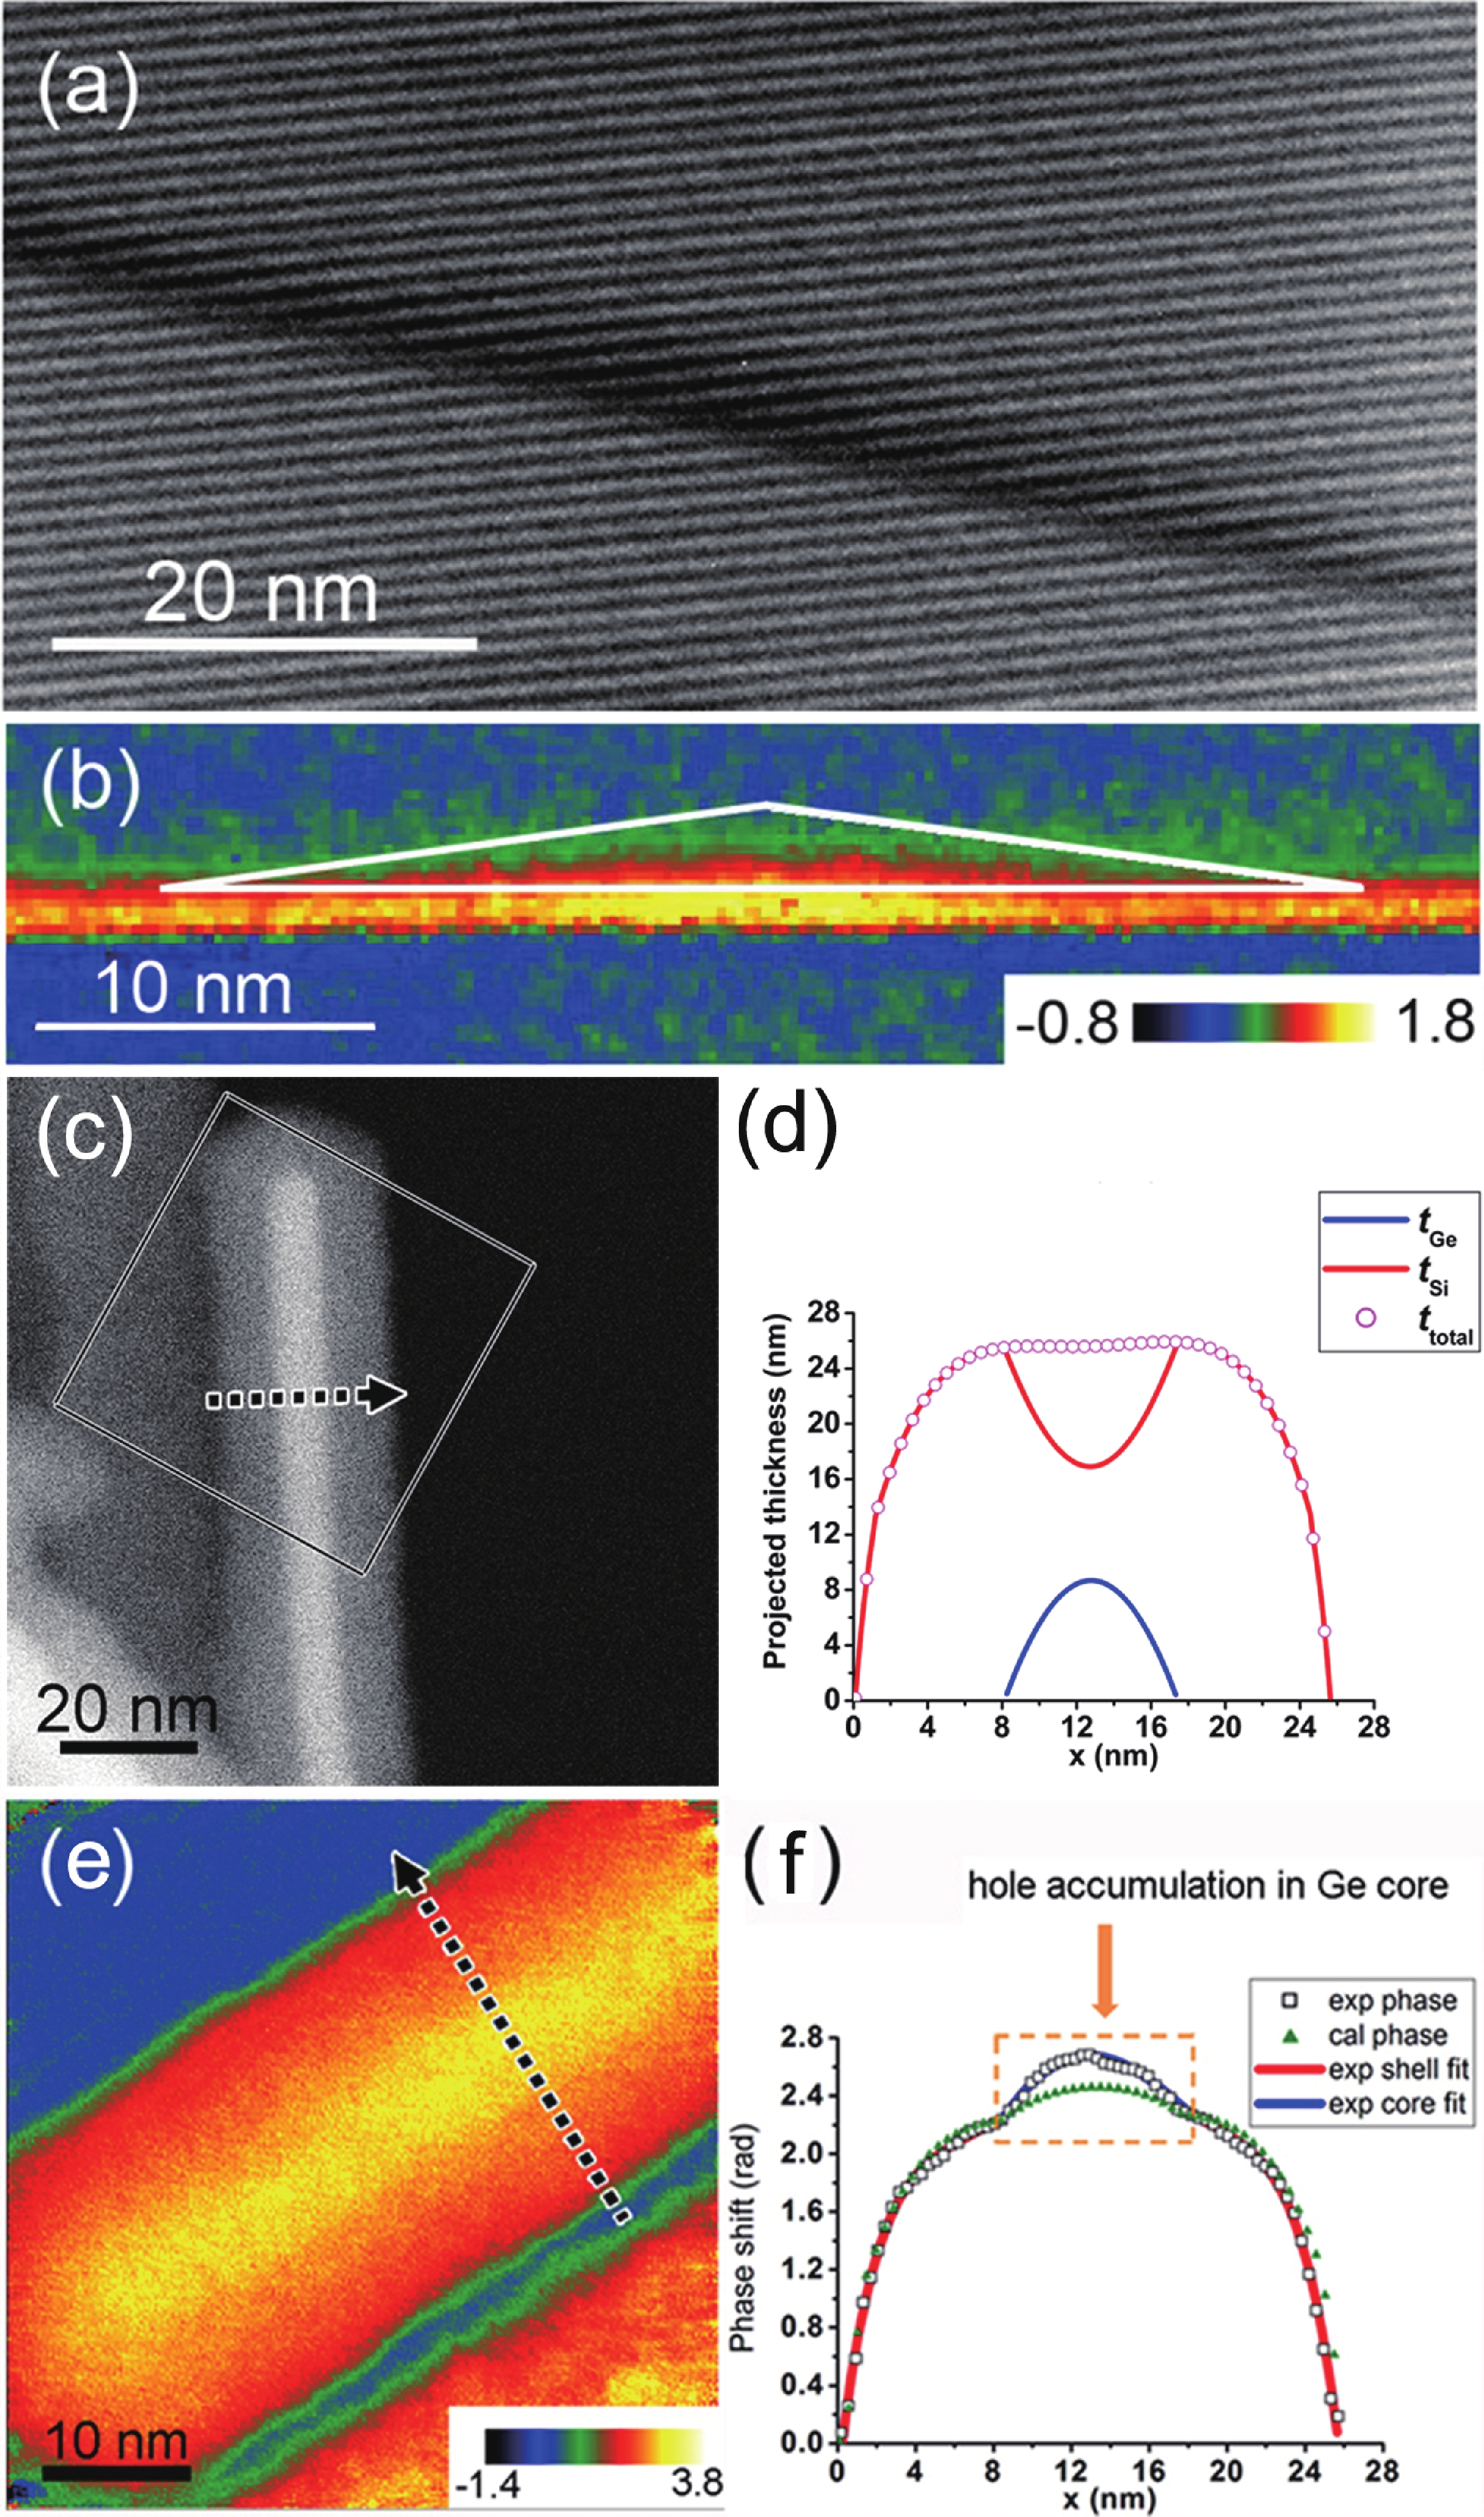 (Color online) (a, b) Electron hologram and phase image of specific Ge quantum dot sandwiched in Si substrates. The bottom of Ge dot shows extra positive phase shifts indicating holes accumulated in this region[18]. (c, d) HAADF image of a Ge/Si core/shell nanowire and the corresponding thicknesses of Ge core (blue) and Si shell (red) for the region indicated by a black-dotted arrow in (c). (e, f) Phase image of the same Ge/Si core/shell nanowire and corresponding phase shift line profile across the heterostructures labeled by a black dotted arrow in (e). Extra positive phase shifts appear in the Ge core region indicating hole accumulation in the Ge core[13].